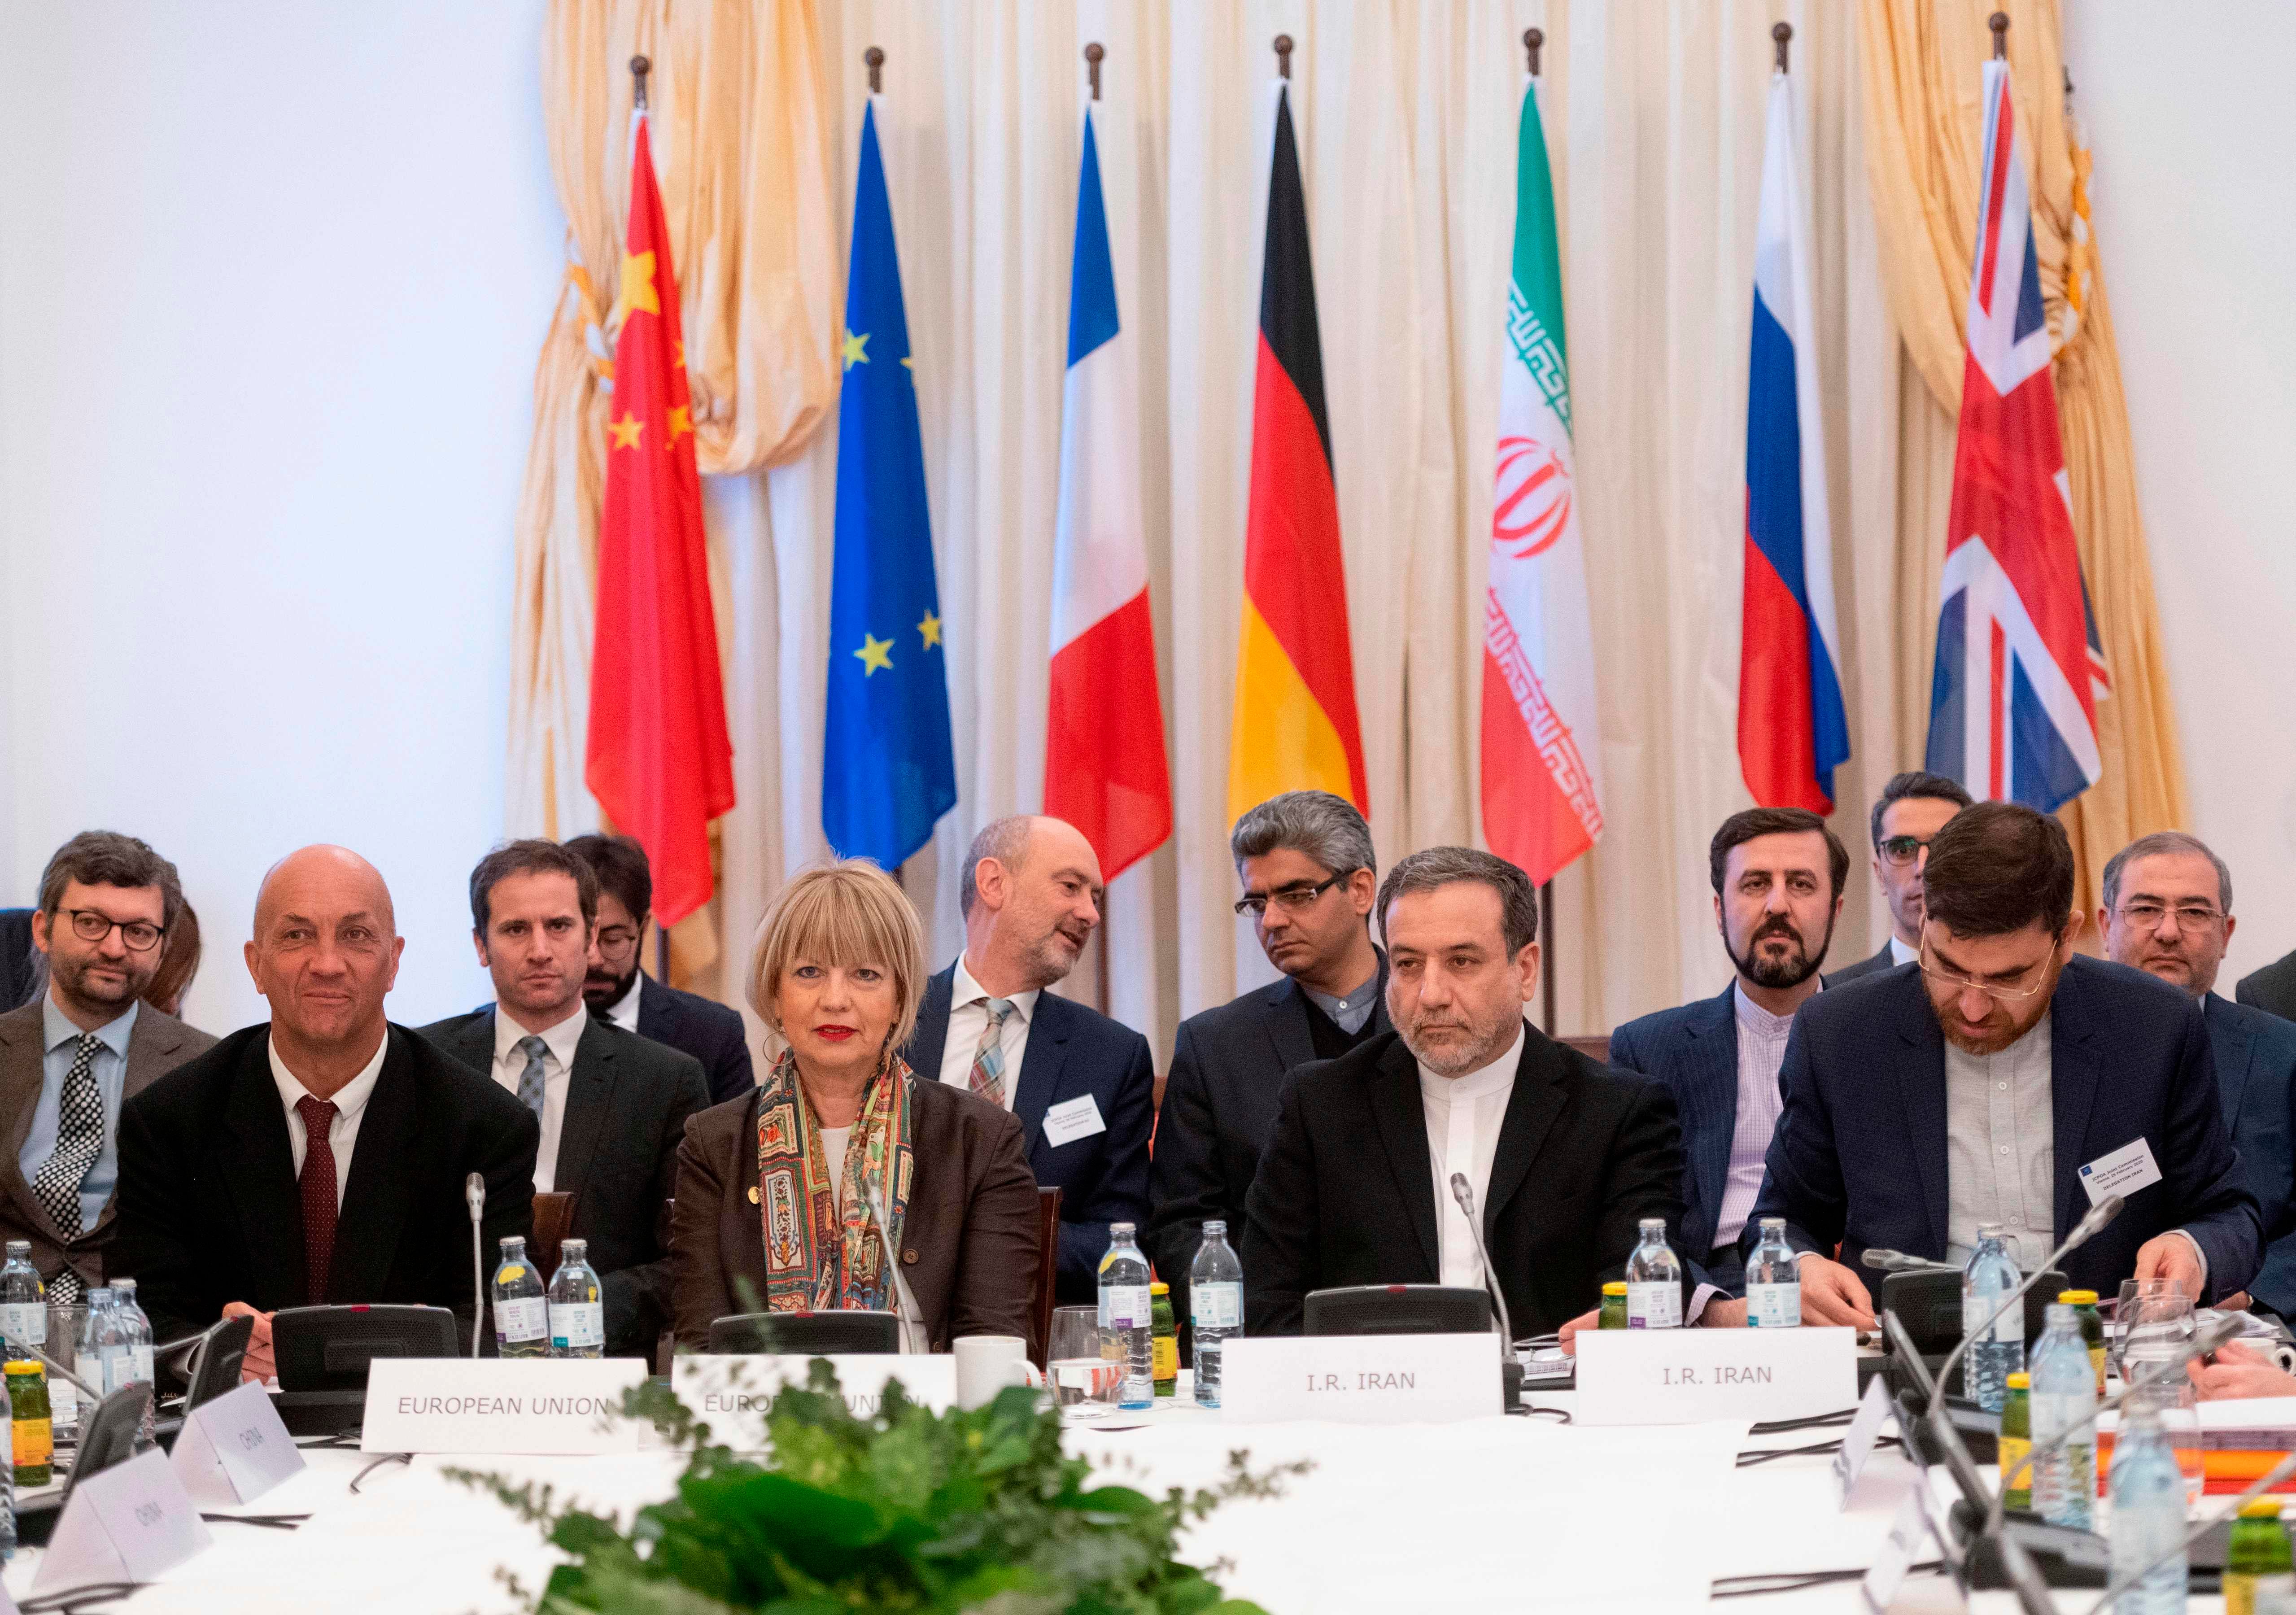 Abbas Araghchi (C-R), political deputy at the Ministry of Foreign Affairs of Iran, and the Secretary General of the European Union External Action Service (EEAS) Helga Schmid (C-L) attend a Meeting of the JCPOA Joint Commission on Iran's nuclear program at the EU Delegation. (Credit: AFP Photo)